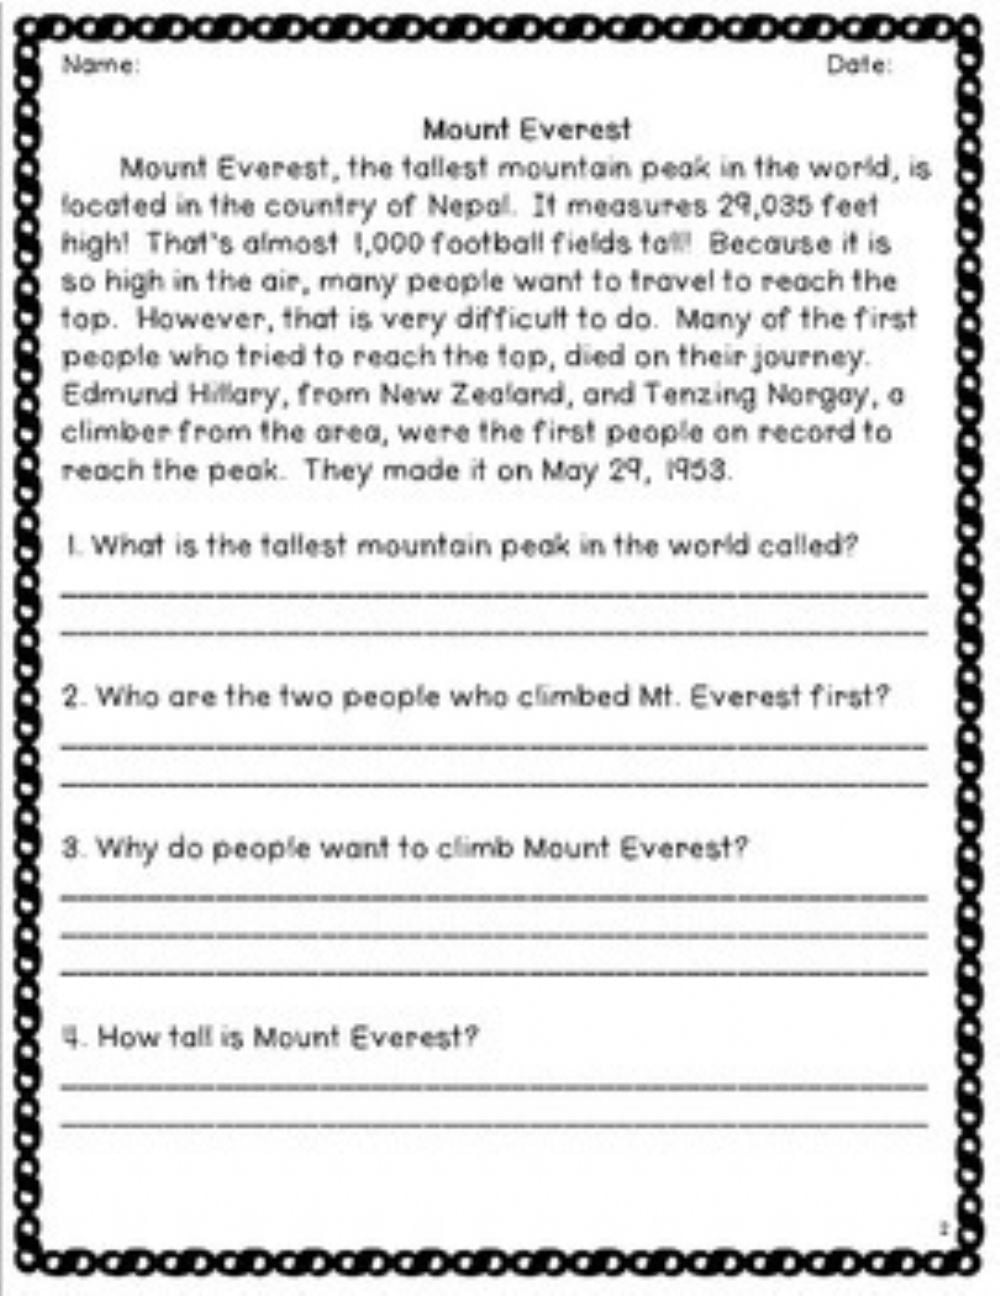 Exercise 1 LIVEWORKSHEETS Reading Comprehension With Open ended Questions Worksheet